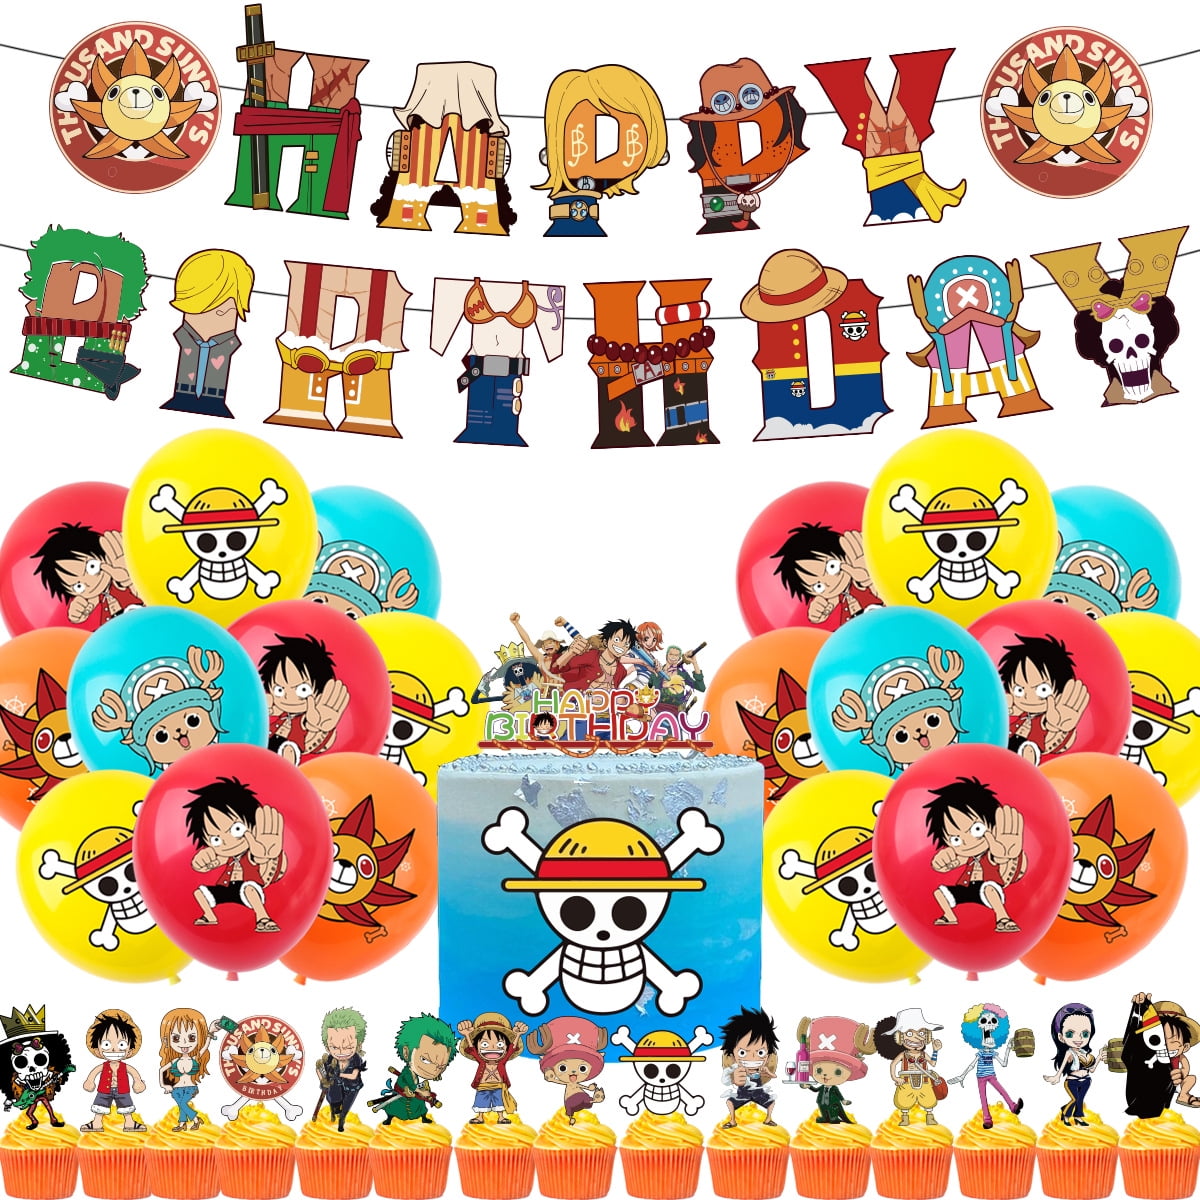 One Piece Anime Theme Party Supplies Kit Decorations Set Favors for Boys  Adult Grils 113 Pcs Includes Cake Cupcake Toppers Backdrop Tablecloth